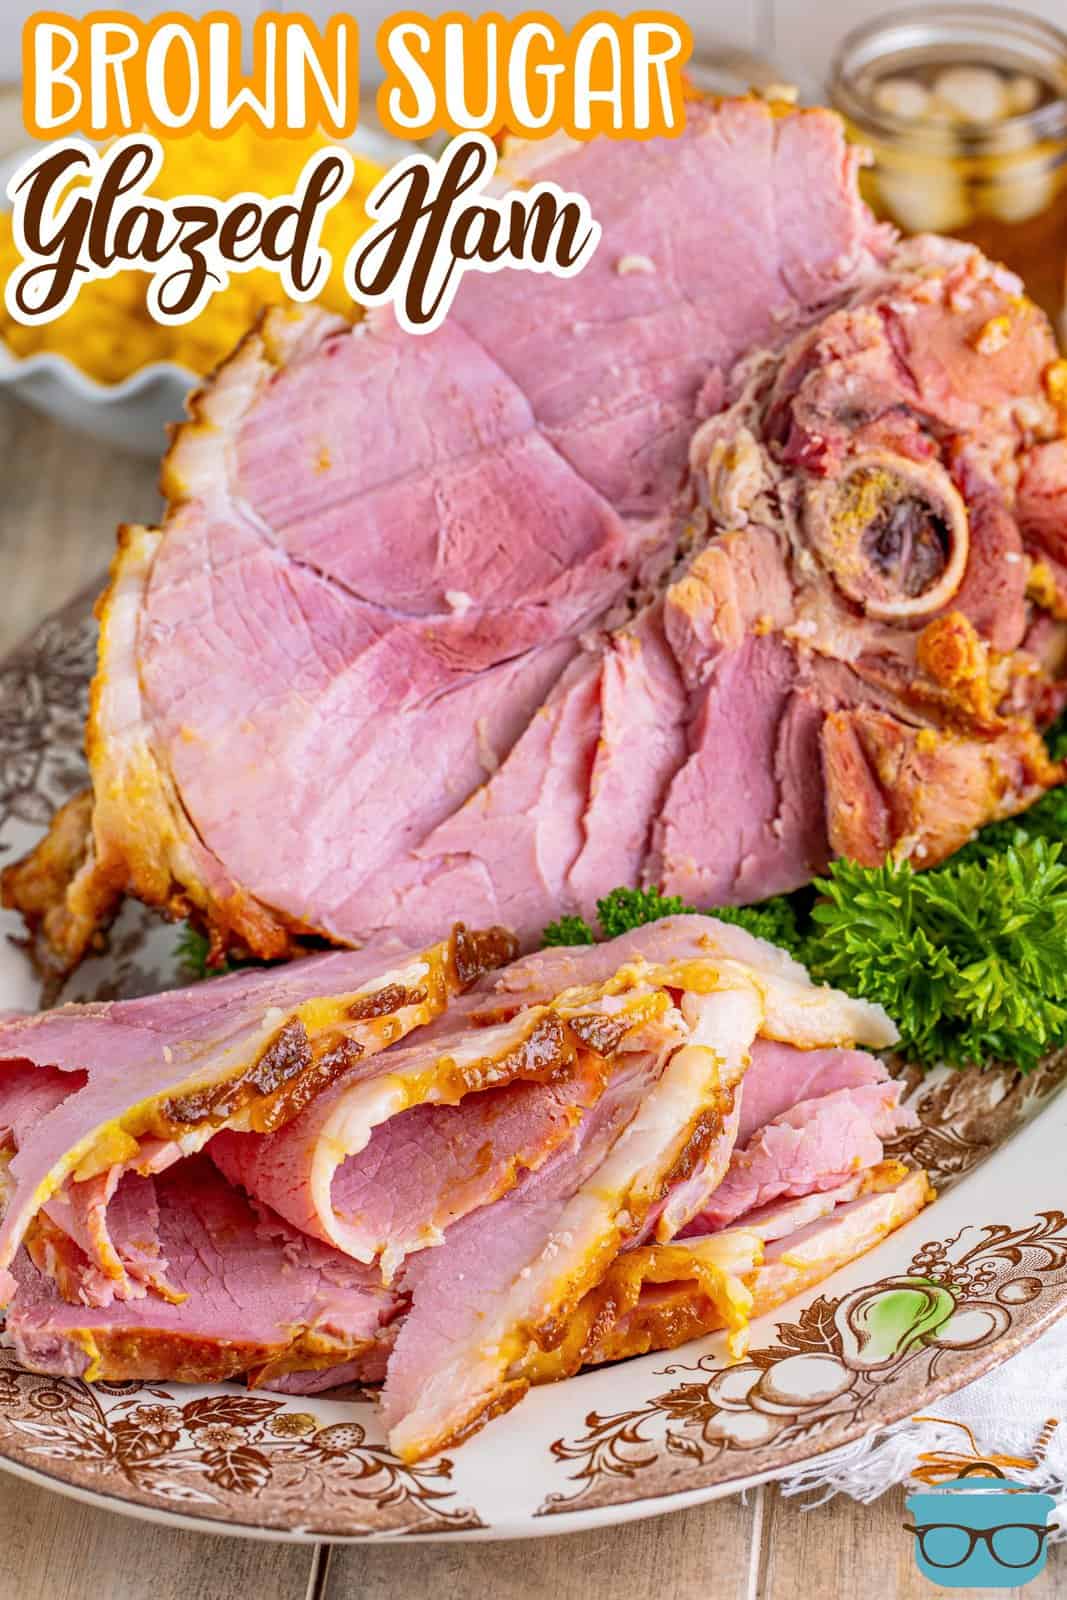 Pinterest image of carved Brown Sugar Glazed Ham on plate with whole ham on platter in back.